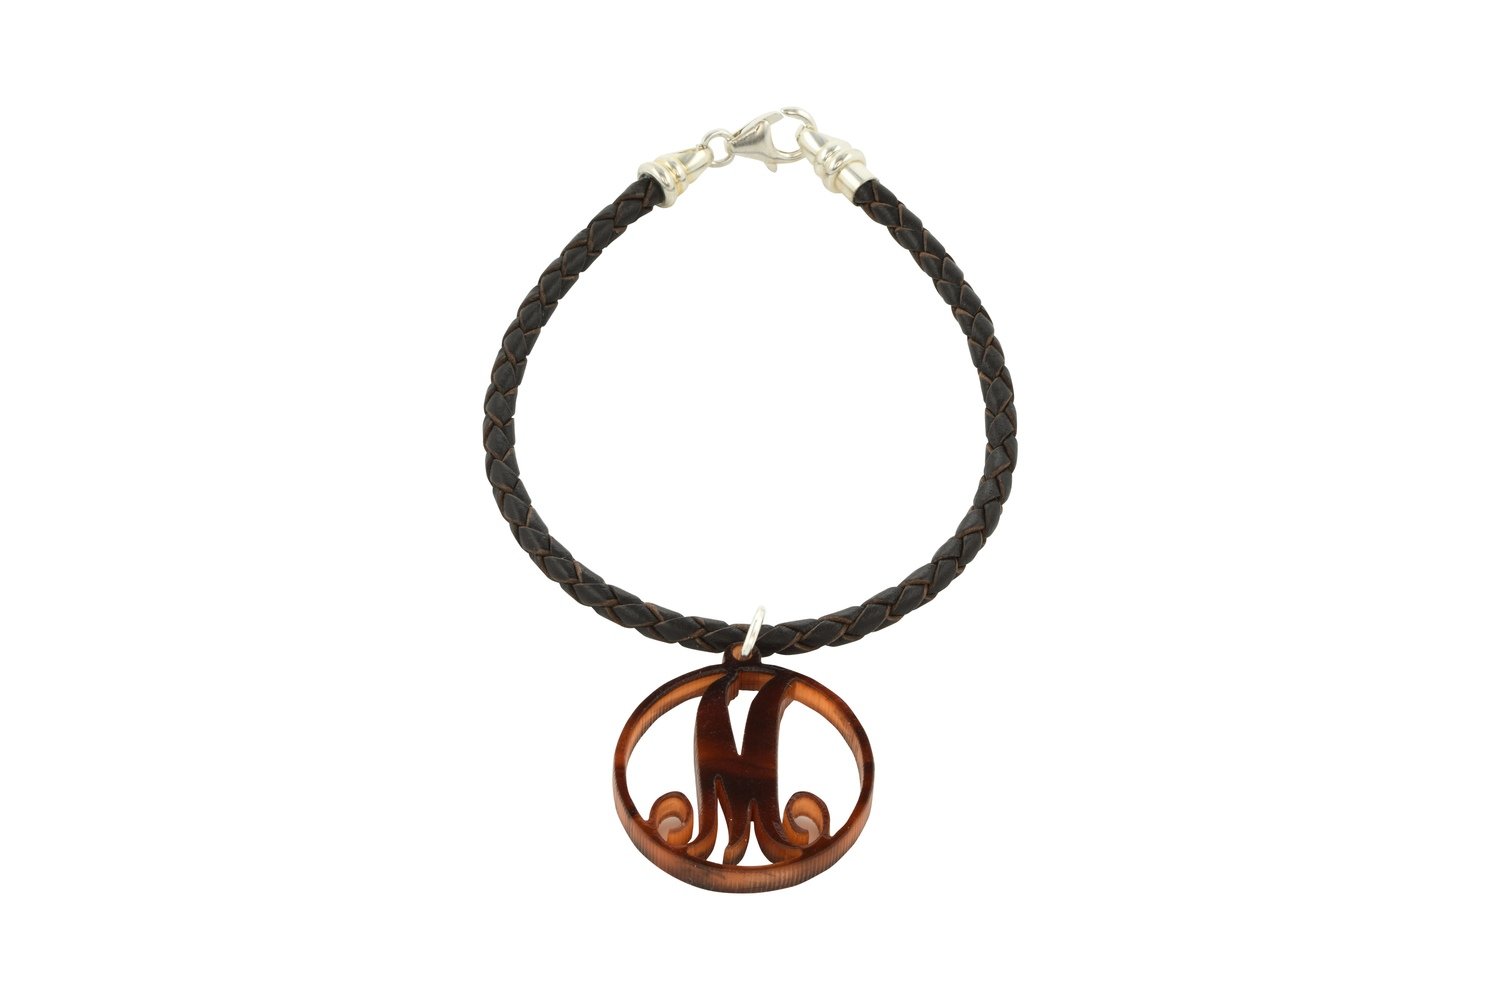 Scroll Initial with Decorative Braided Leather Cord Bracelet